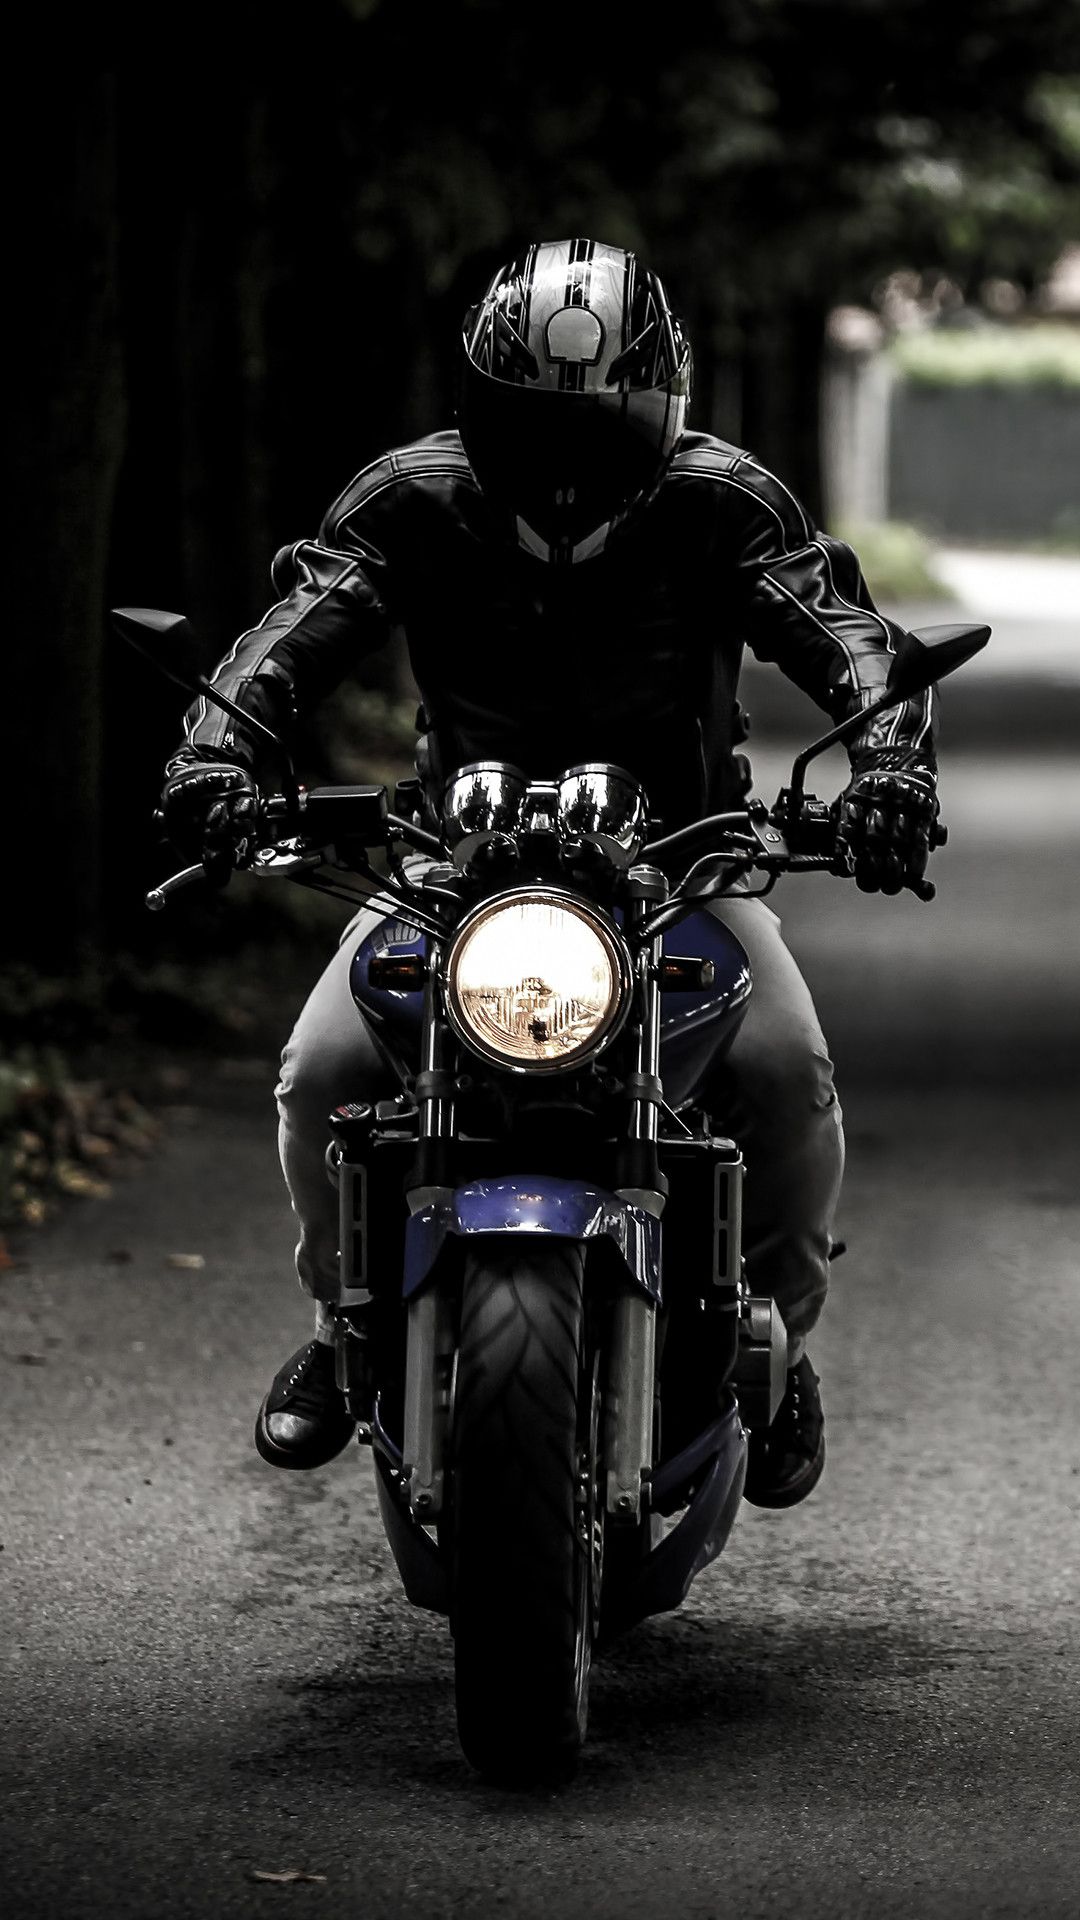 Motorcycle Mobile Wallpaper Free Motorcycle Mobile Background